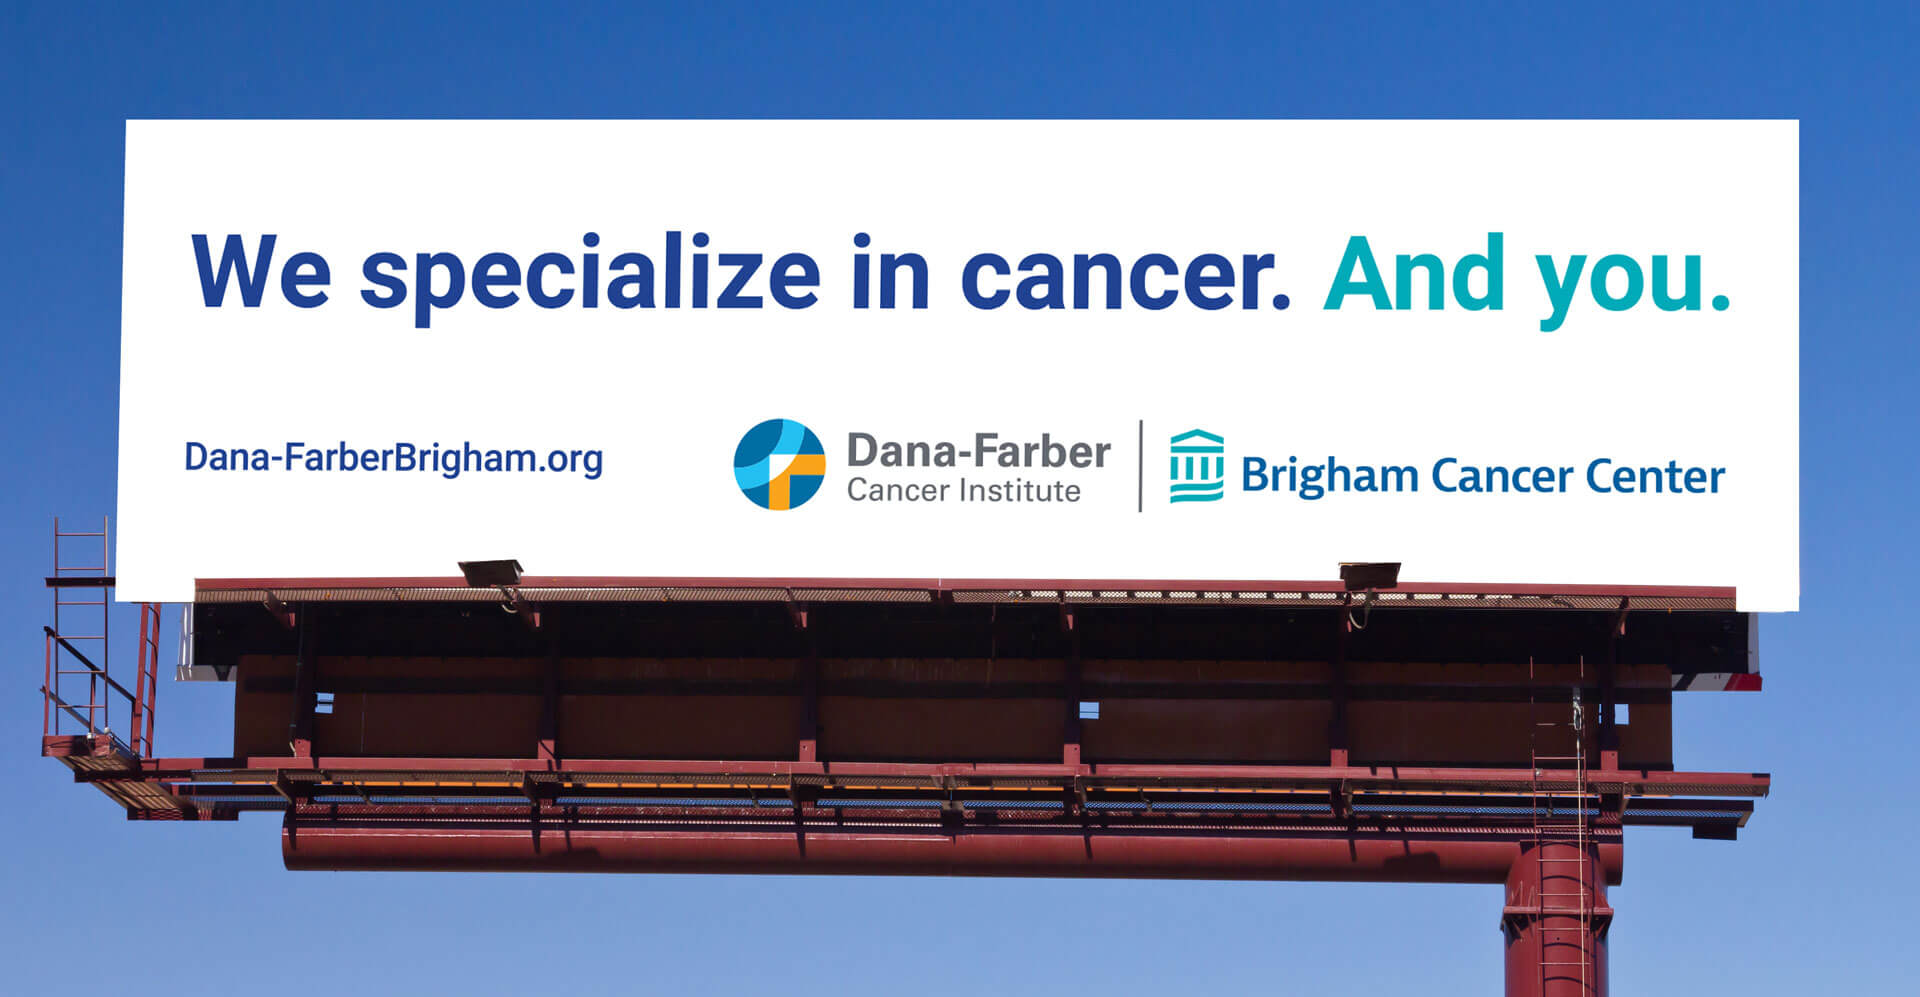 Dana-Farber Brigham Cancer Center. We specialize in cancer. And you.